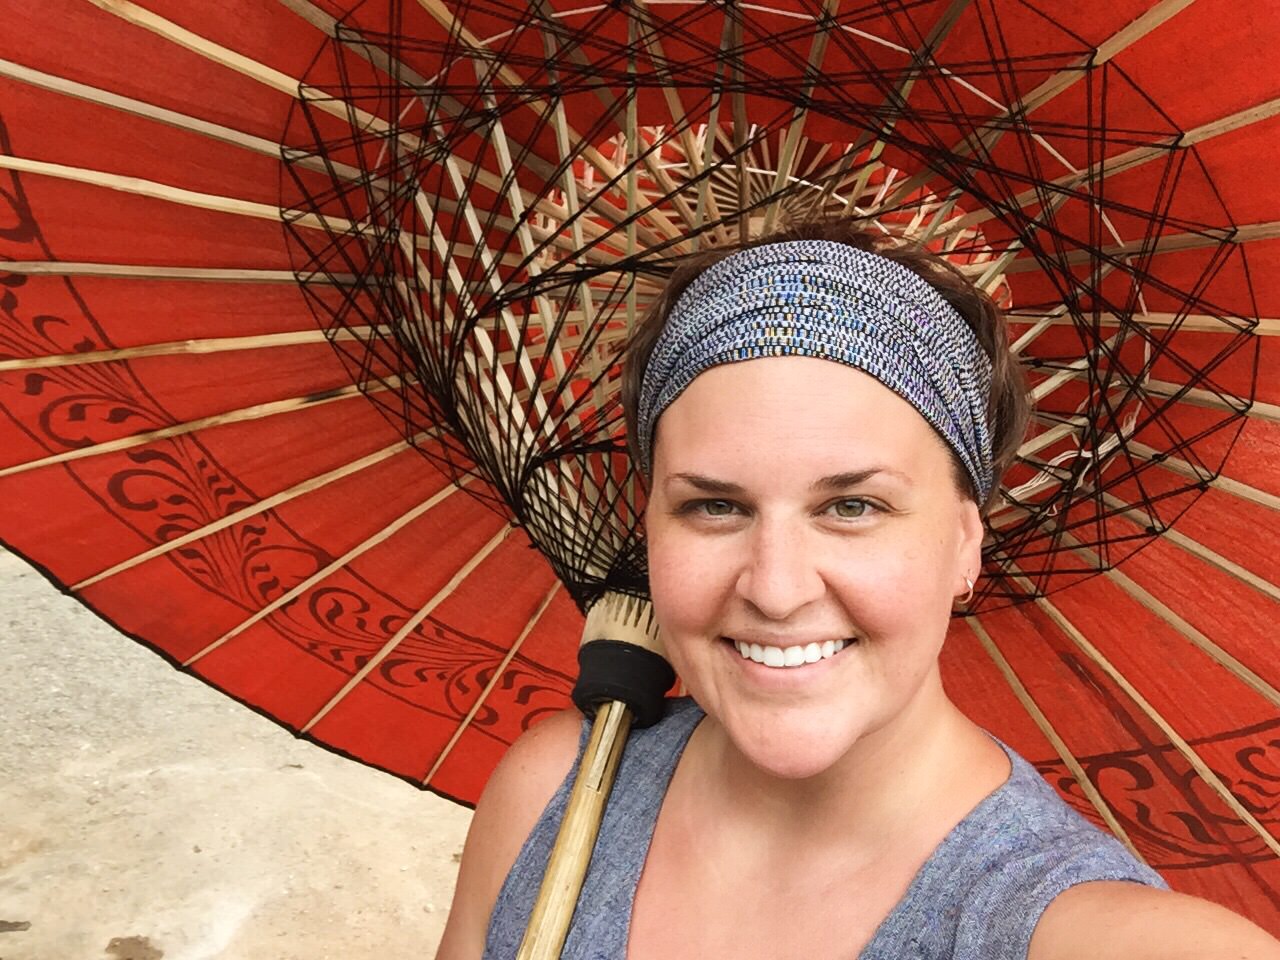 A giant parasol like this costs $40 USD. Unfortunately, it wouldn't fit in my backpack. (c) 2015 Gail Jessen